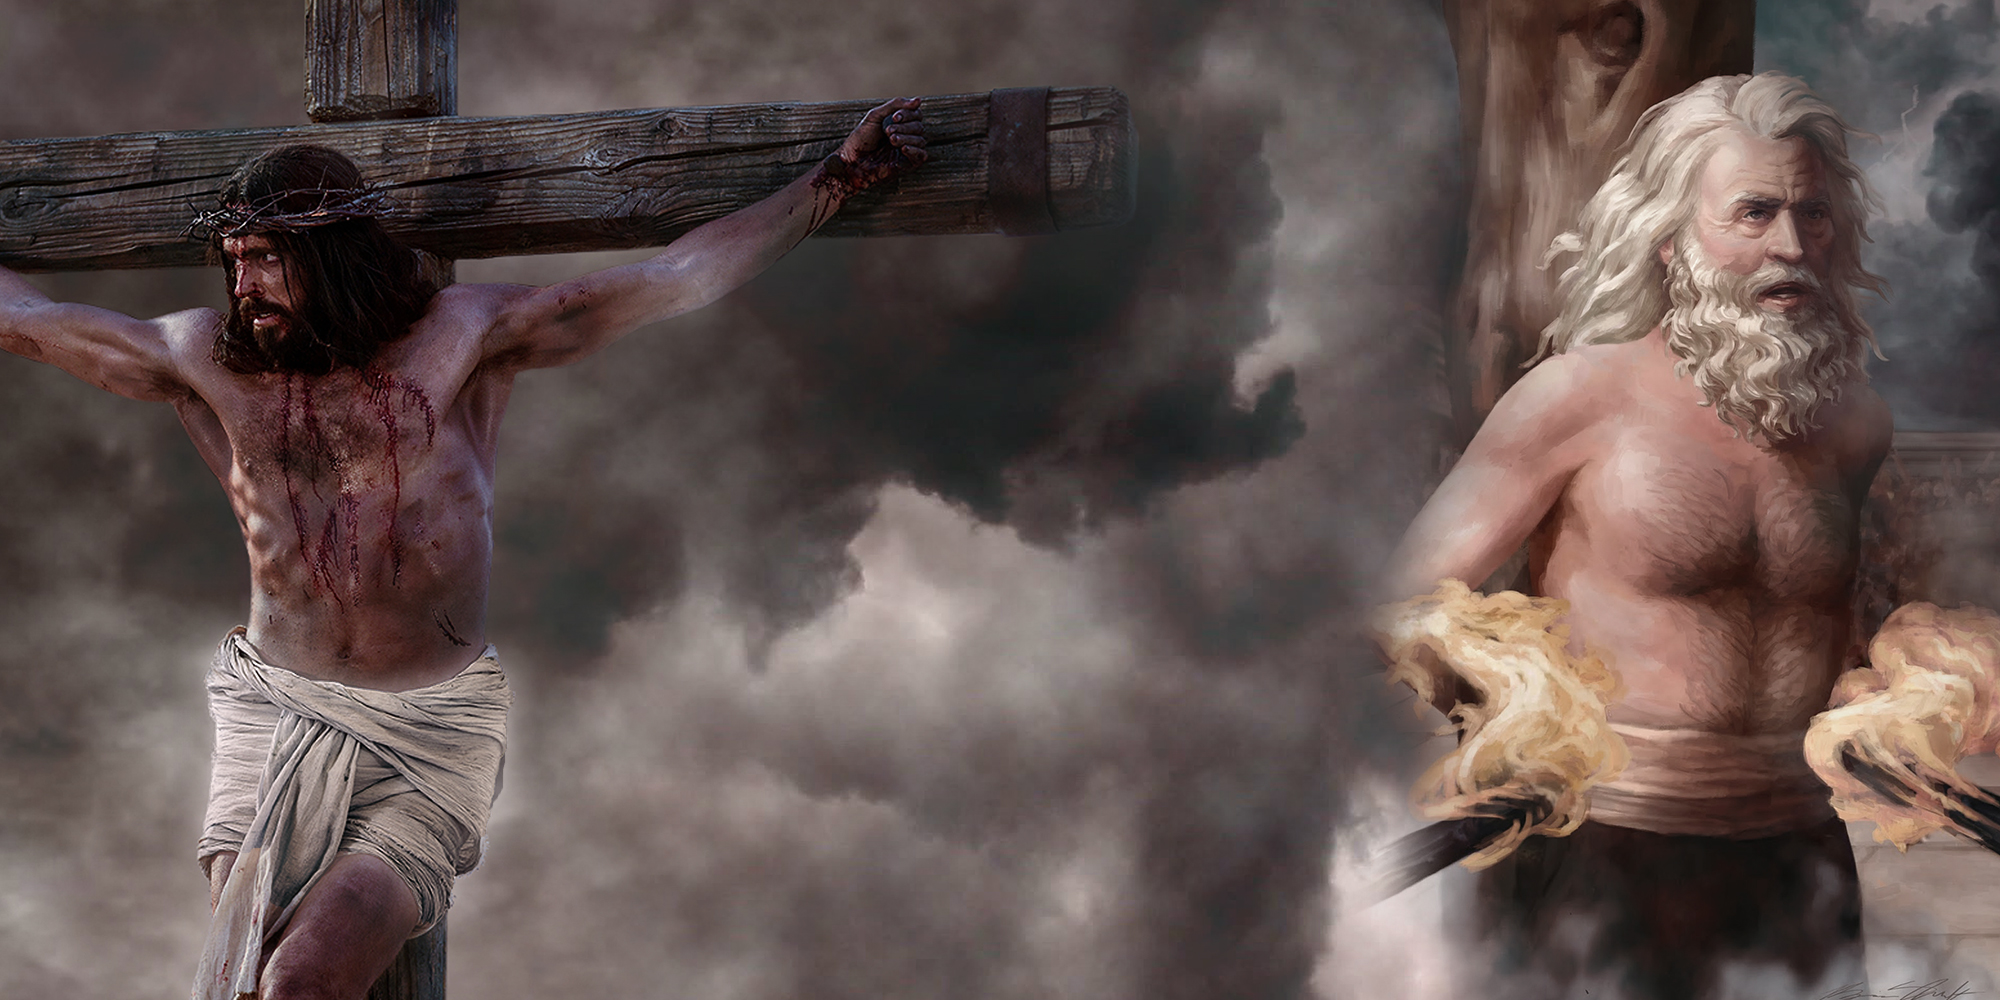 Image by Book of Mormon Central, featuring Abinadi by Briana Shawcroft and Jesus Christ on the Cross via lds.org